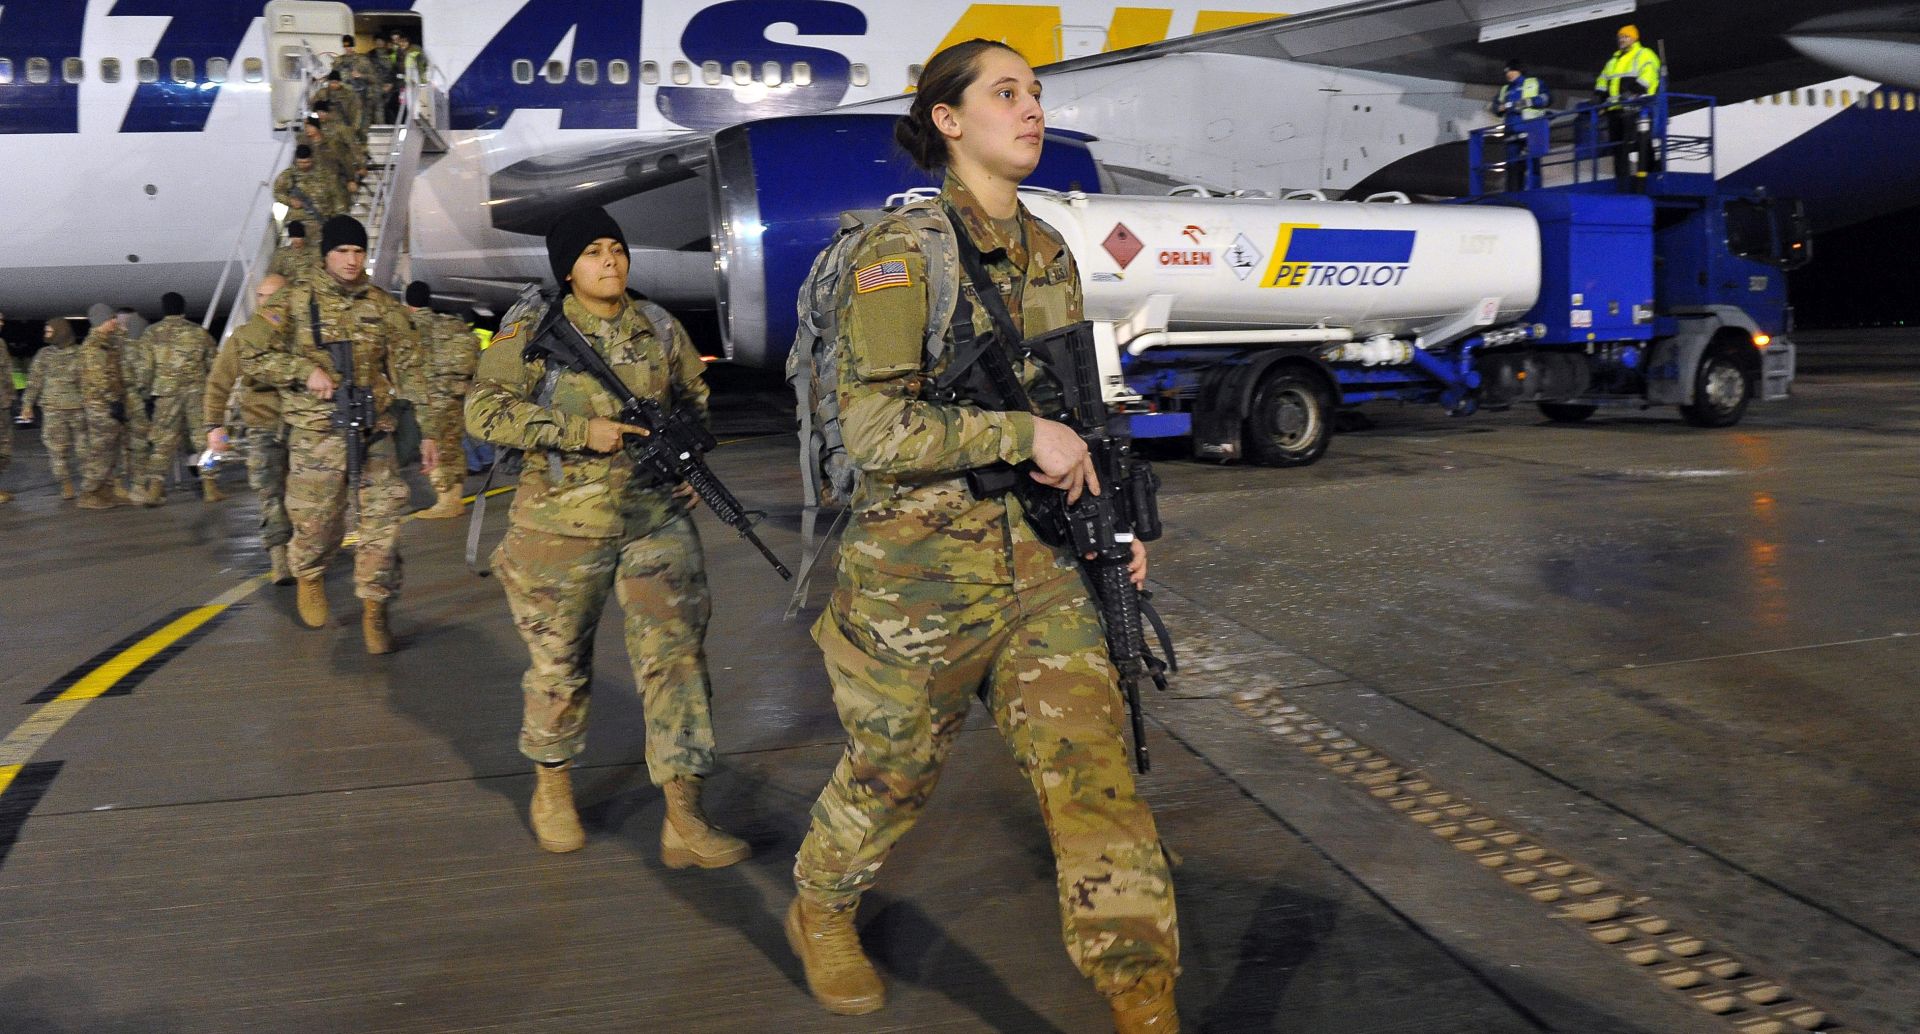 epa05713800 US soldiers arrive at the airport in Goleniow, Poland, 12 January 2017. Some 173 US soldiers arrived to Goleniow as part of an effort to reinforce NATO's eastern flank. The American armoured brigade - the 3rd Armored Brigade Combat Team, part of the 4th Infantry Division, from Fort Carson, Colorado, is to be deployed to Poland as well as the Baltic states and Romania as part of Operation Atlantic Resolve.  EPA/MARCIN BIELECKI POLAND OUT